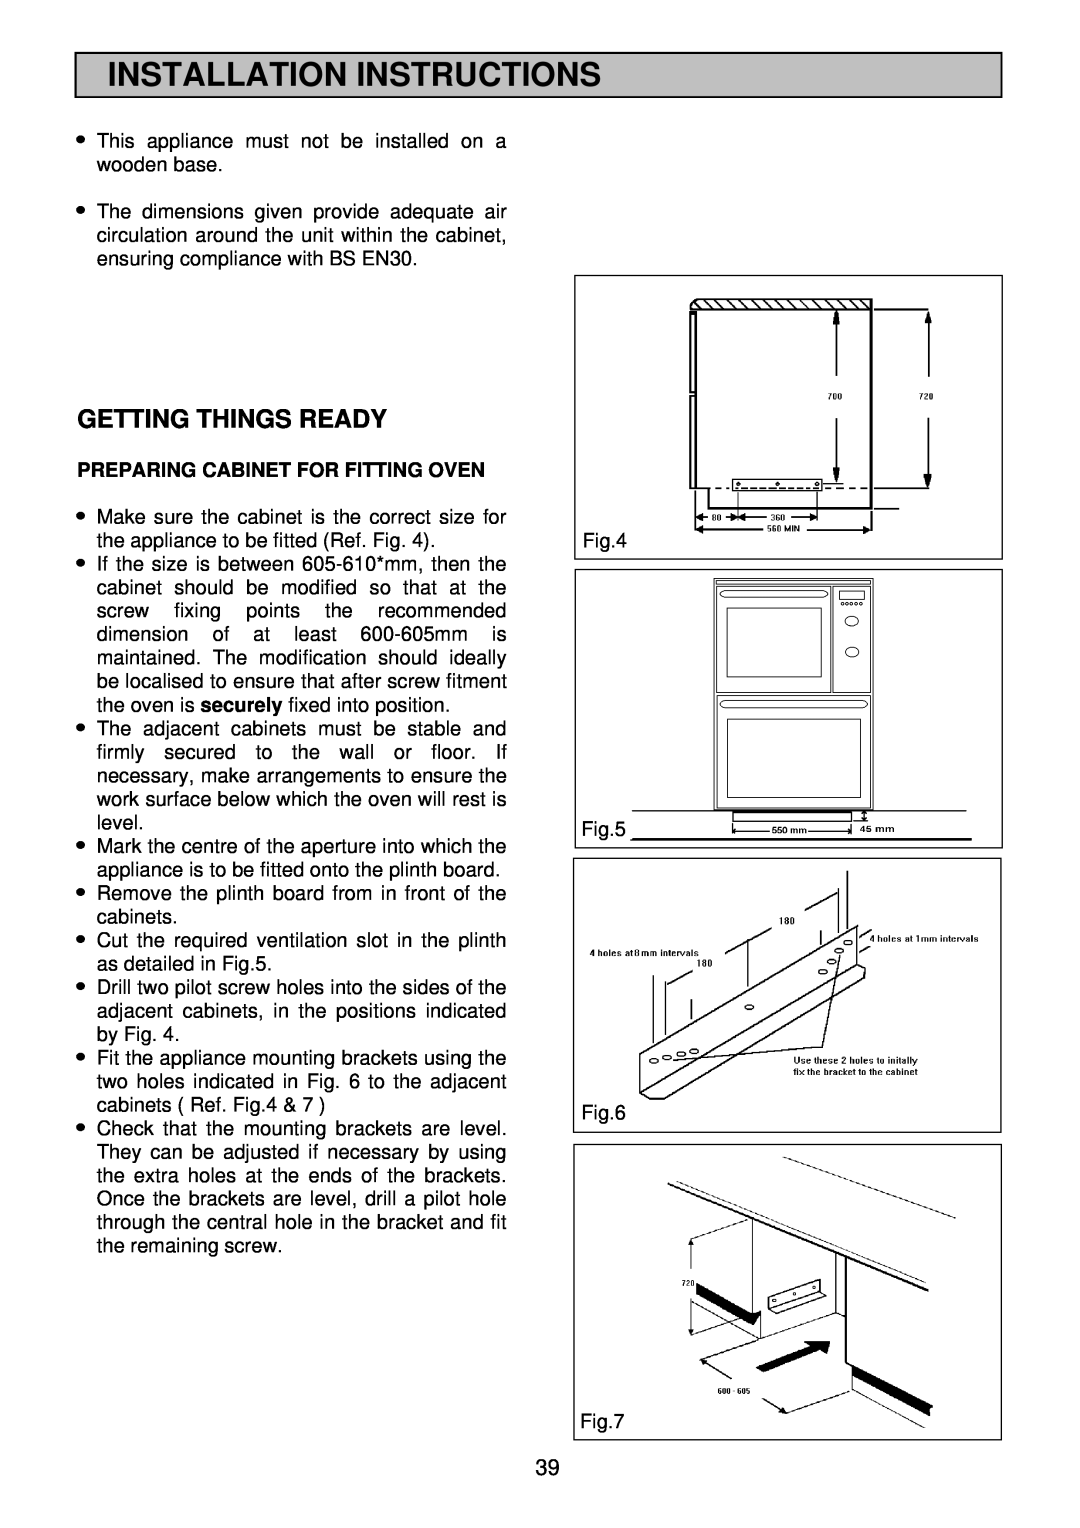 Electrolux EDB 876 manual Getting Things Ready, Installation Instructions, Preparing Cabinet For Fitting Oven 